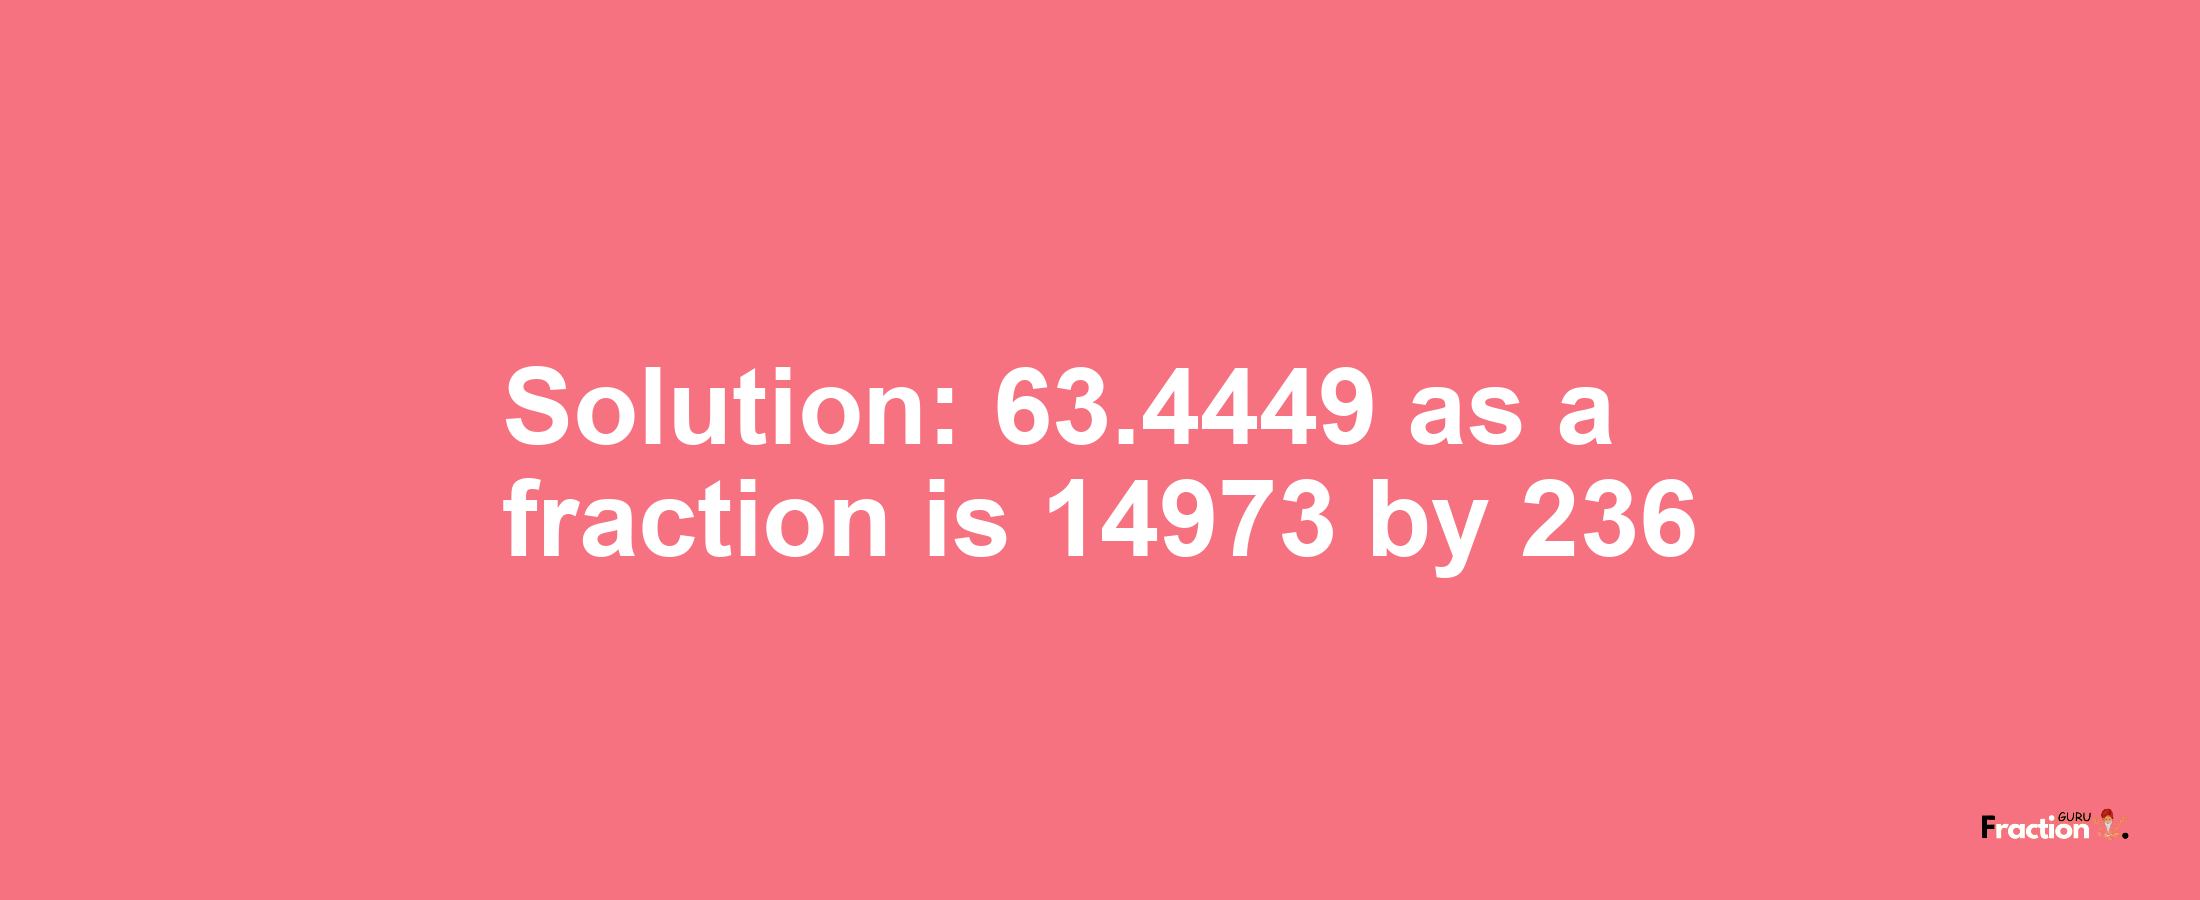 Solution:63.4449 as a fraction is 14973/236